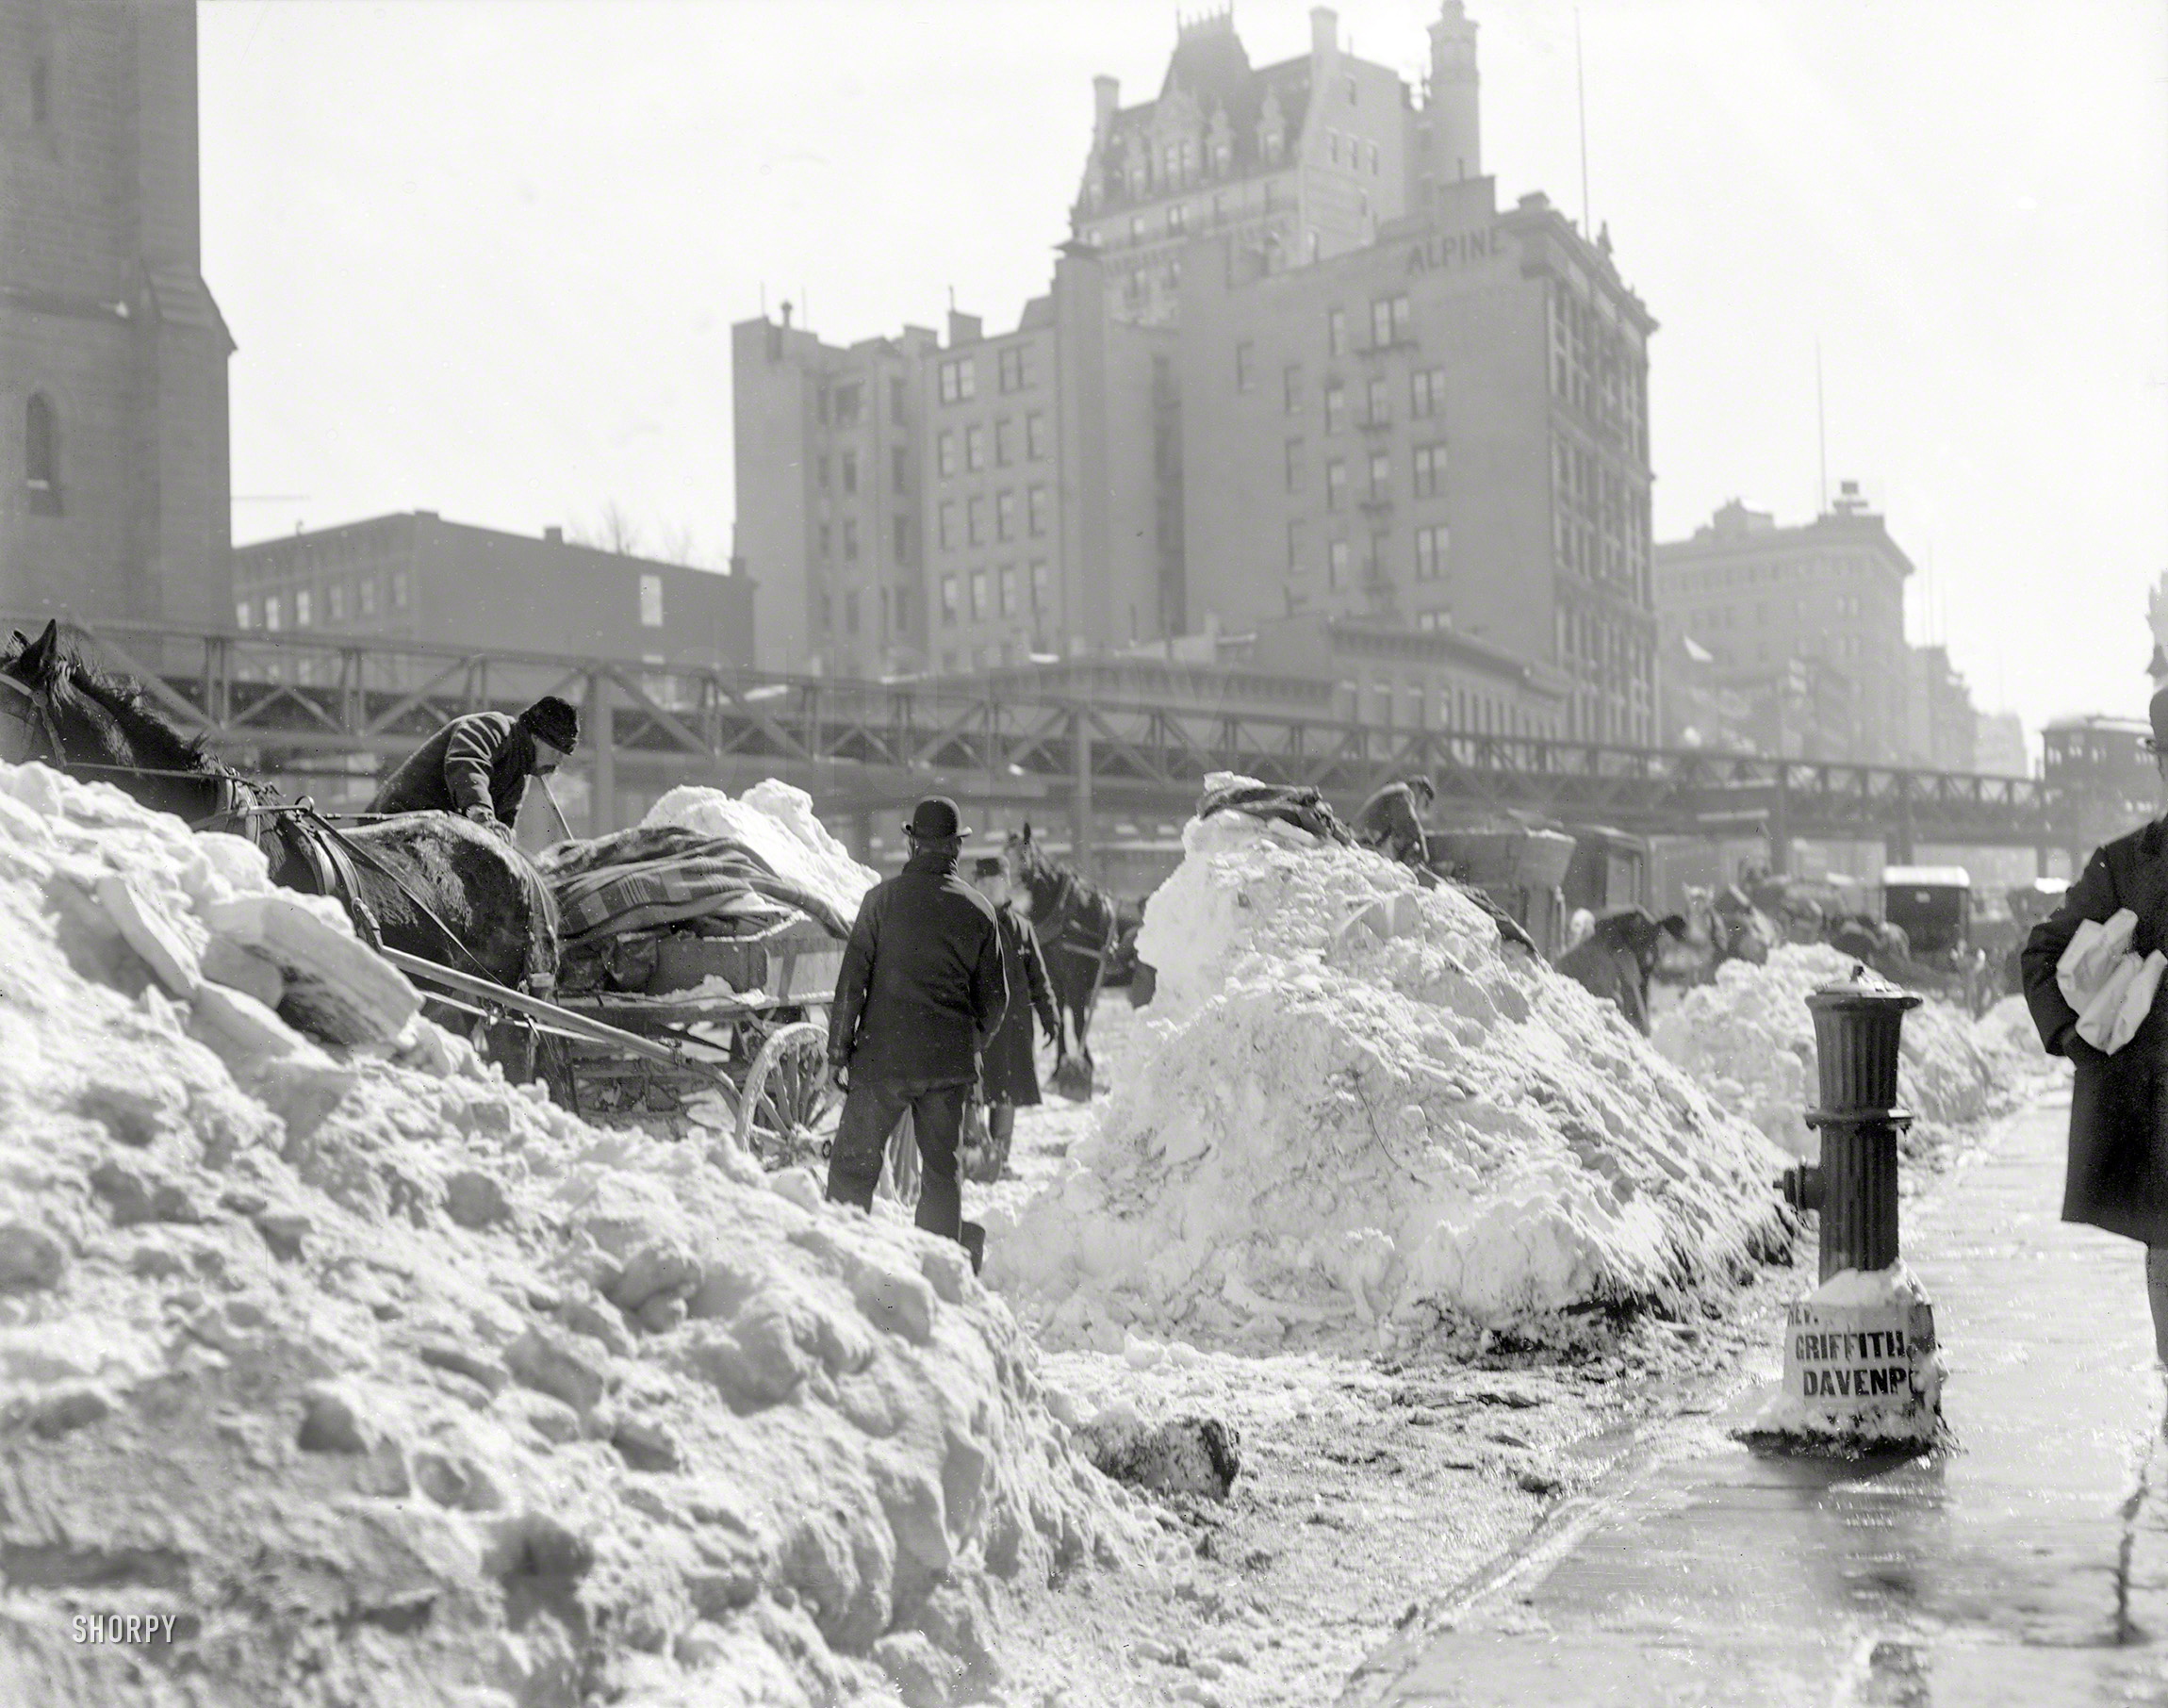 "Blizzard '99 - cleaning the streets after New York snowstorm." Photo by Byron. 8x10 inch glass negative, Detroit Publishing Company. View full size.